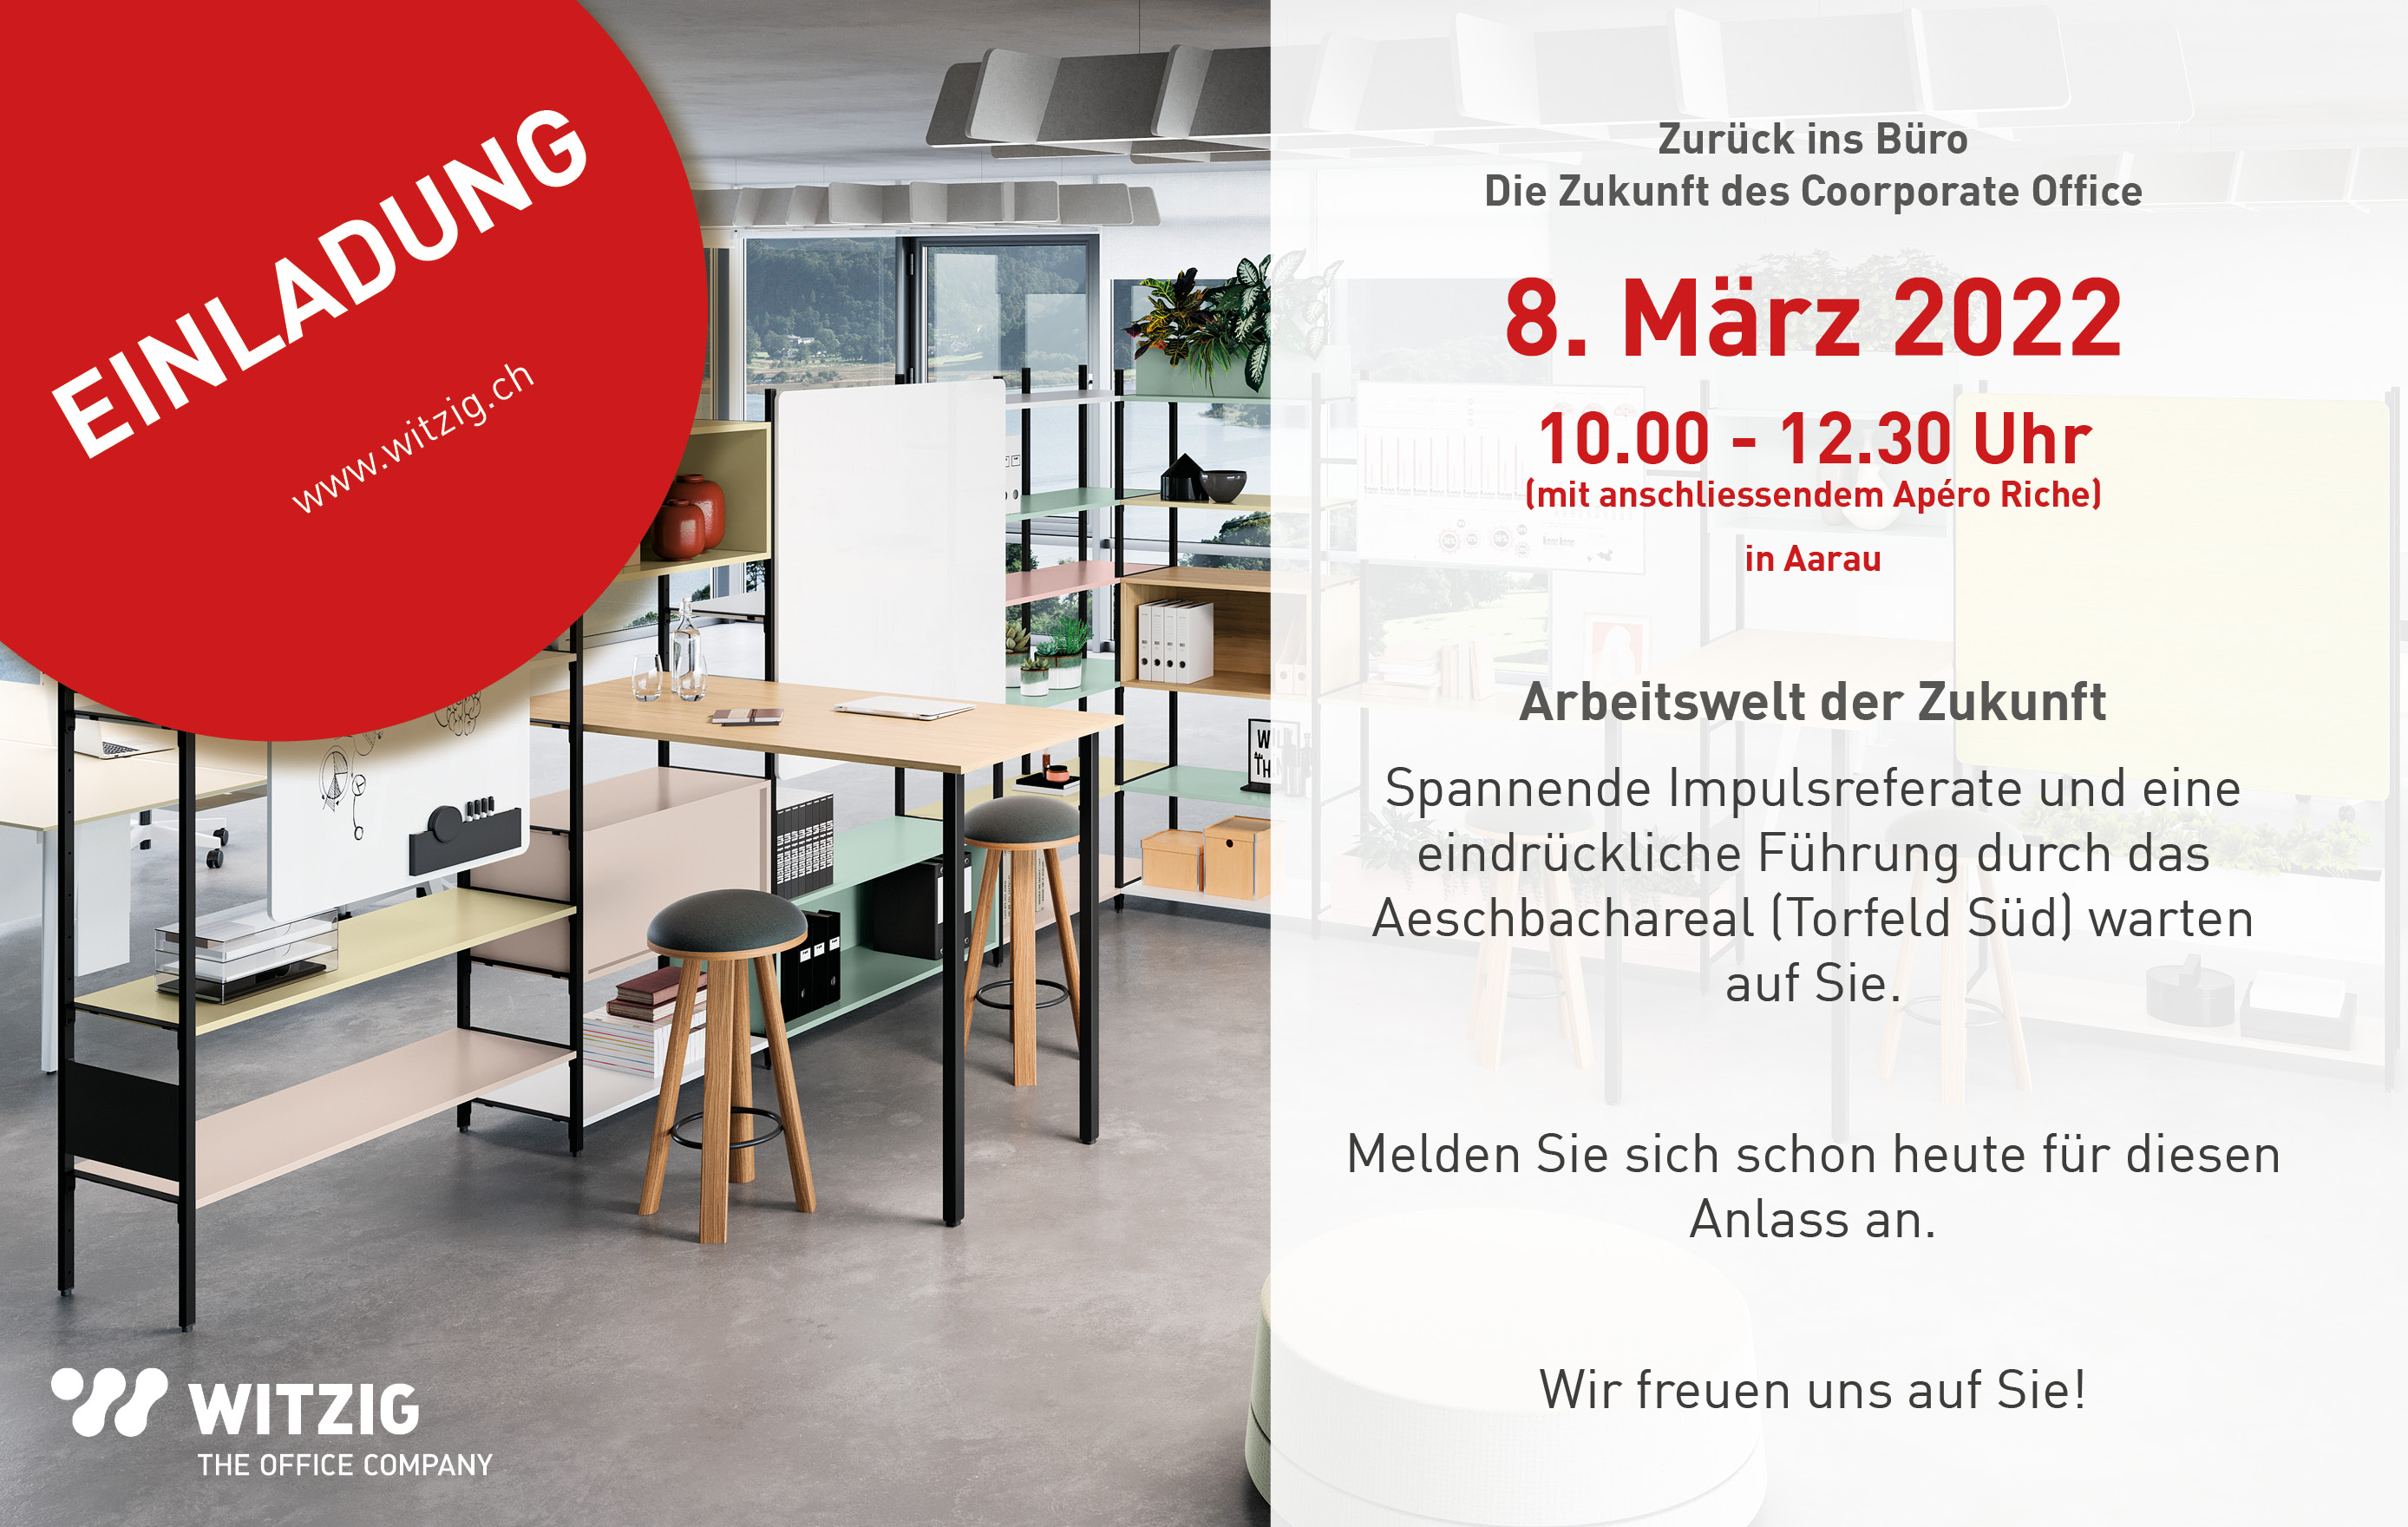 Witzig The Office Company: Event in Aarau